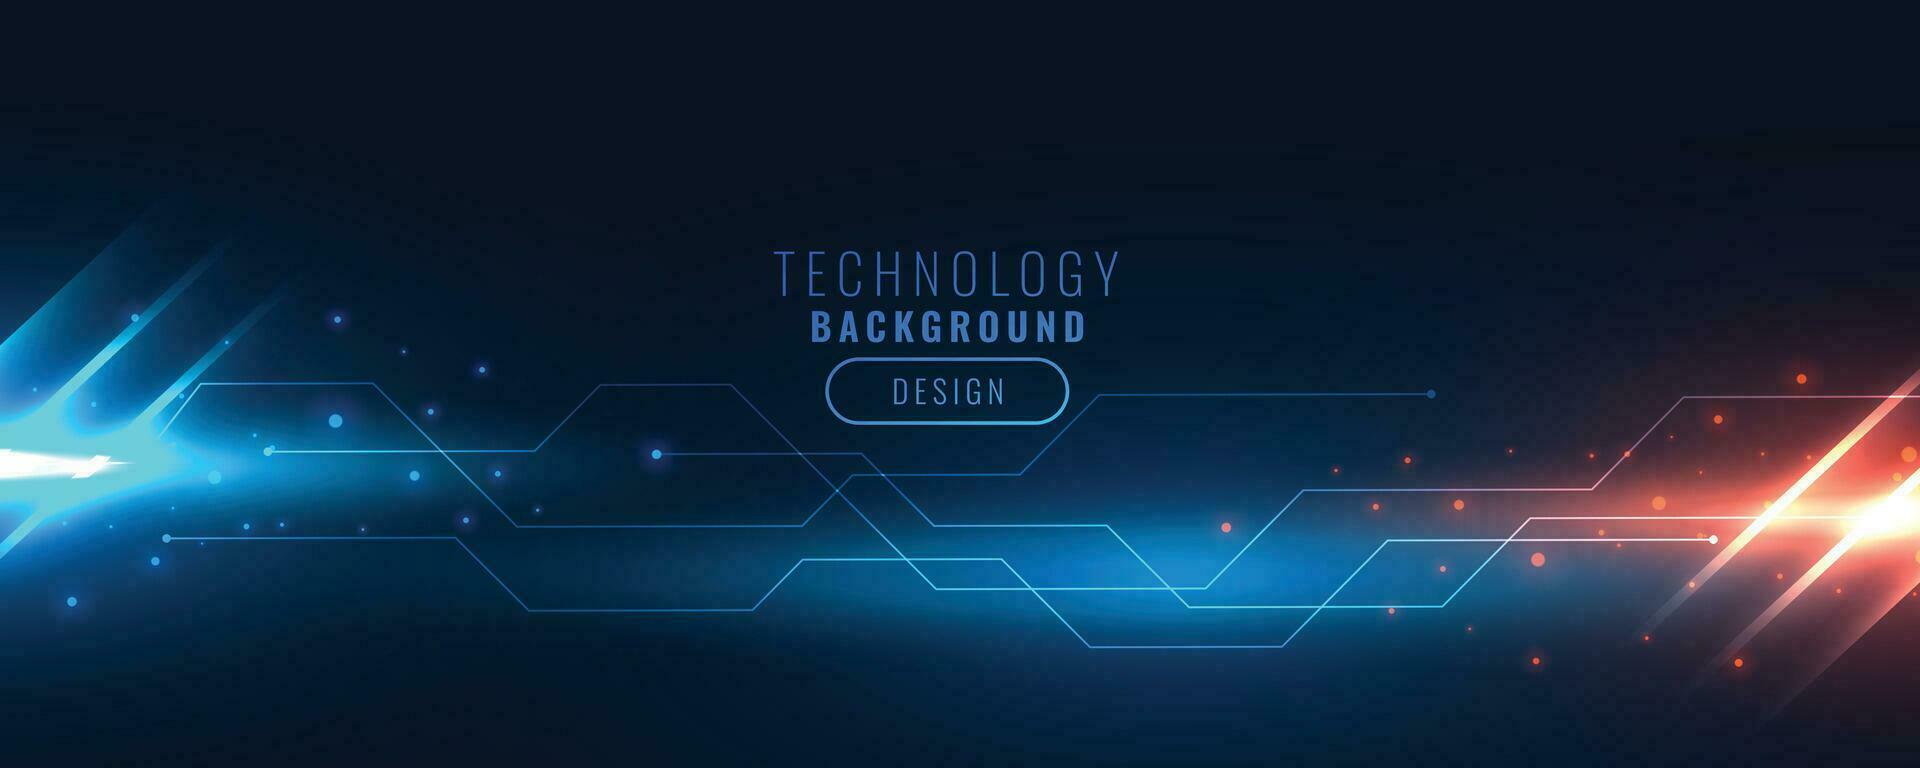 technology backend banner with circuit lines and light streak vector